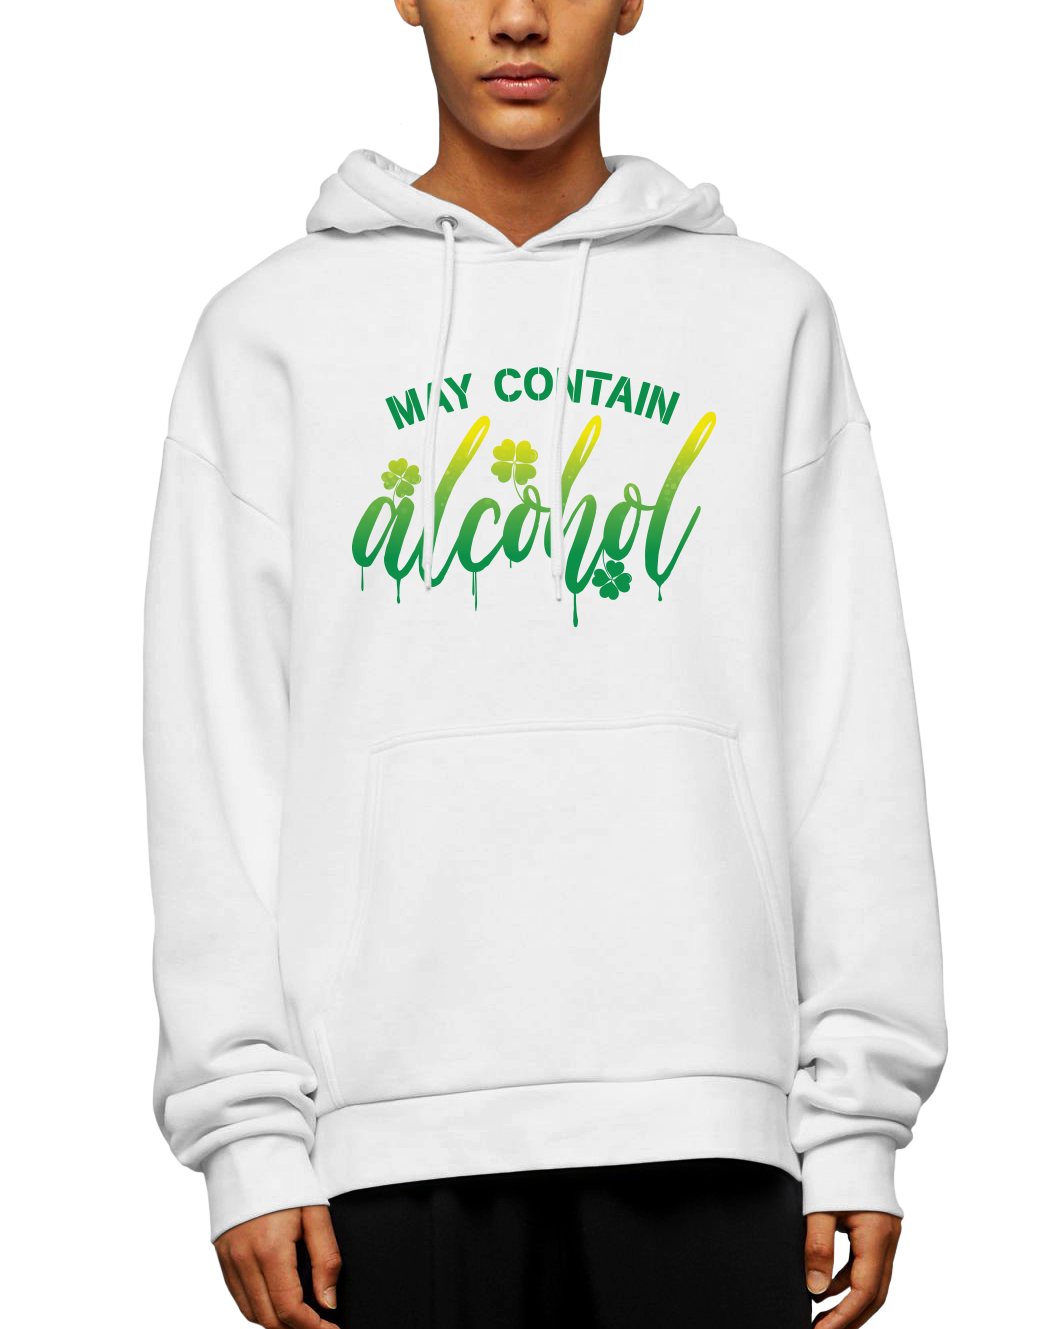 May Contain Alcohol Clover Adult Pullover Hoodie